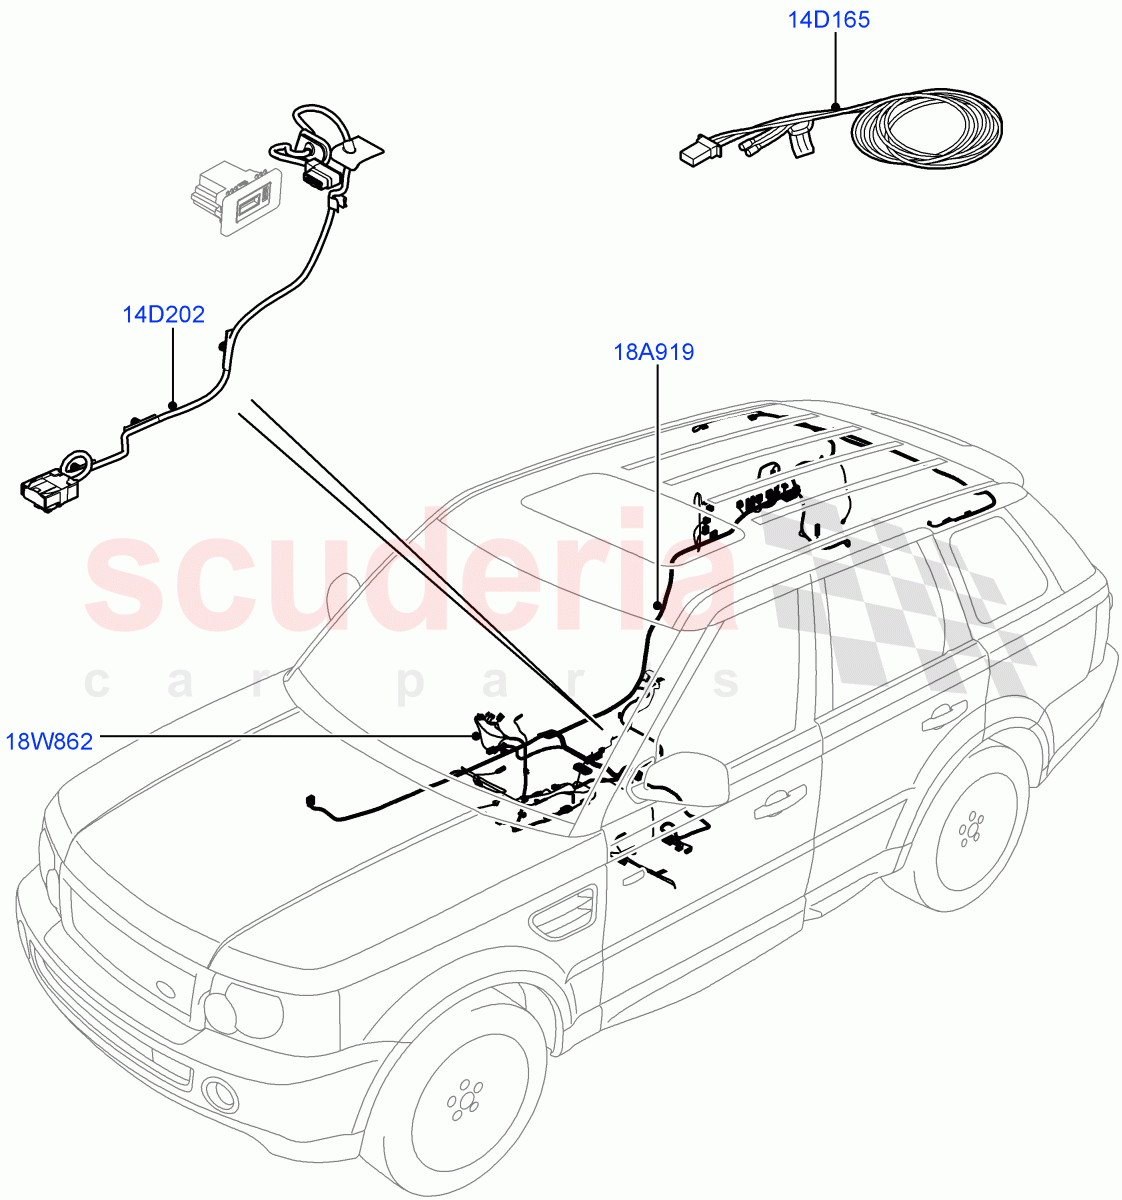 Electrical Wiring - Body And Rear(Audio/Navigation/Entertainment)((V)FROMBA000001,(V)TOBA999999) of Land Rover Land Rover Range Rover Sport (2010-2013) [5.0 OHC SGDI SC V8 Petrol]